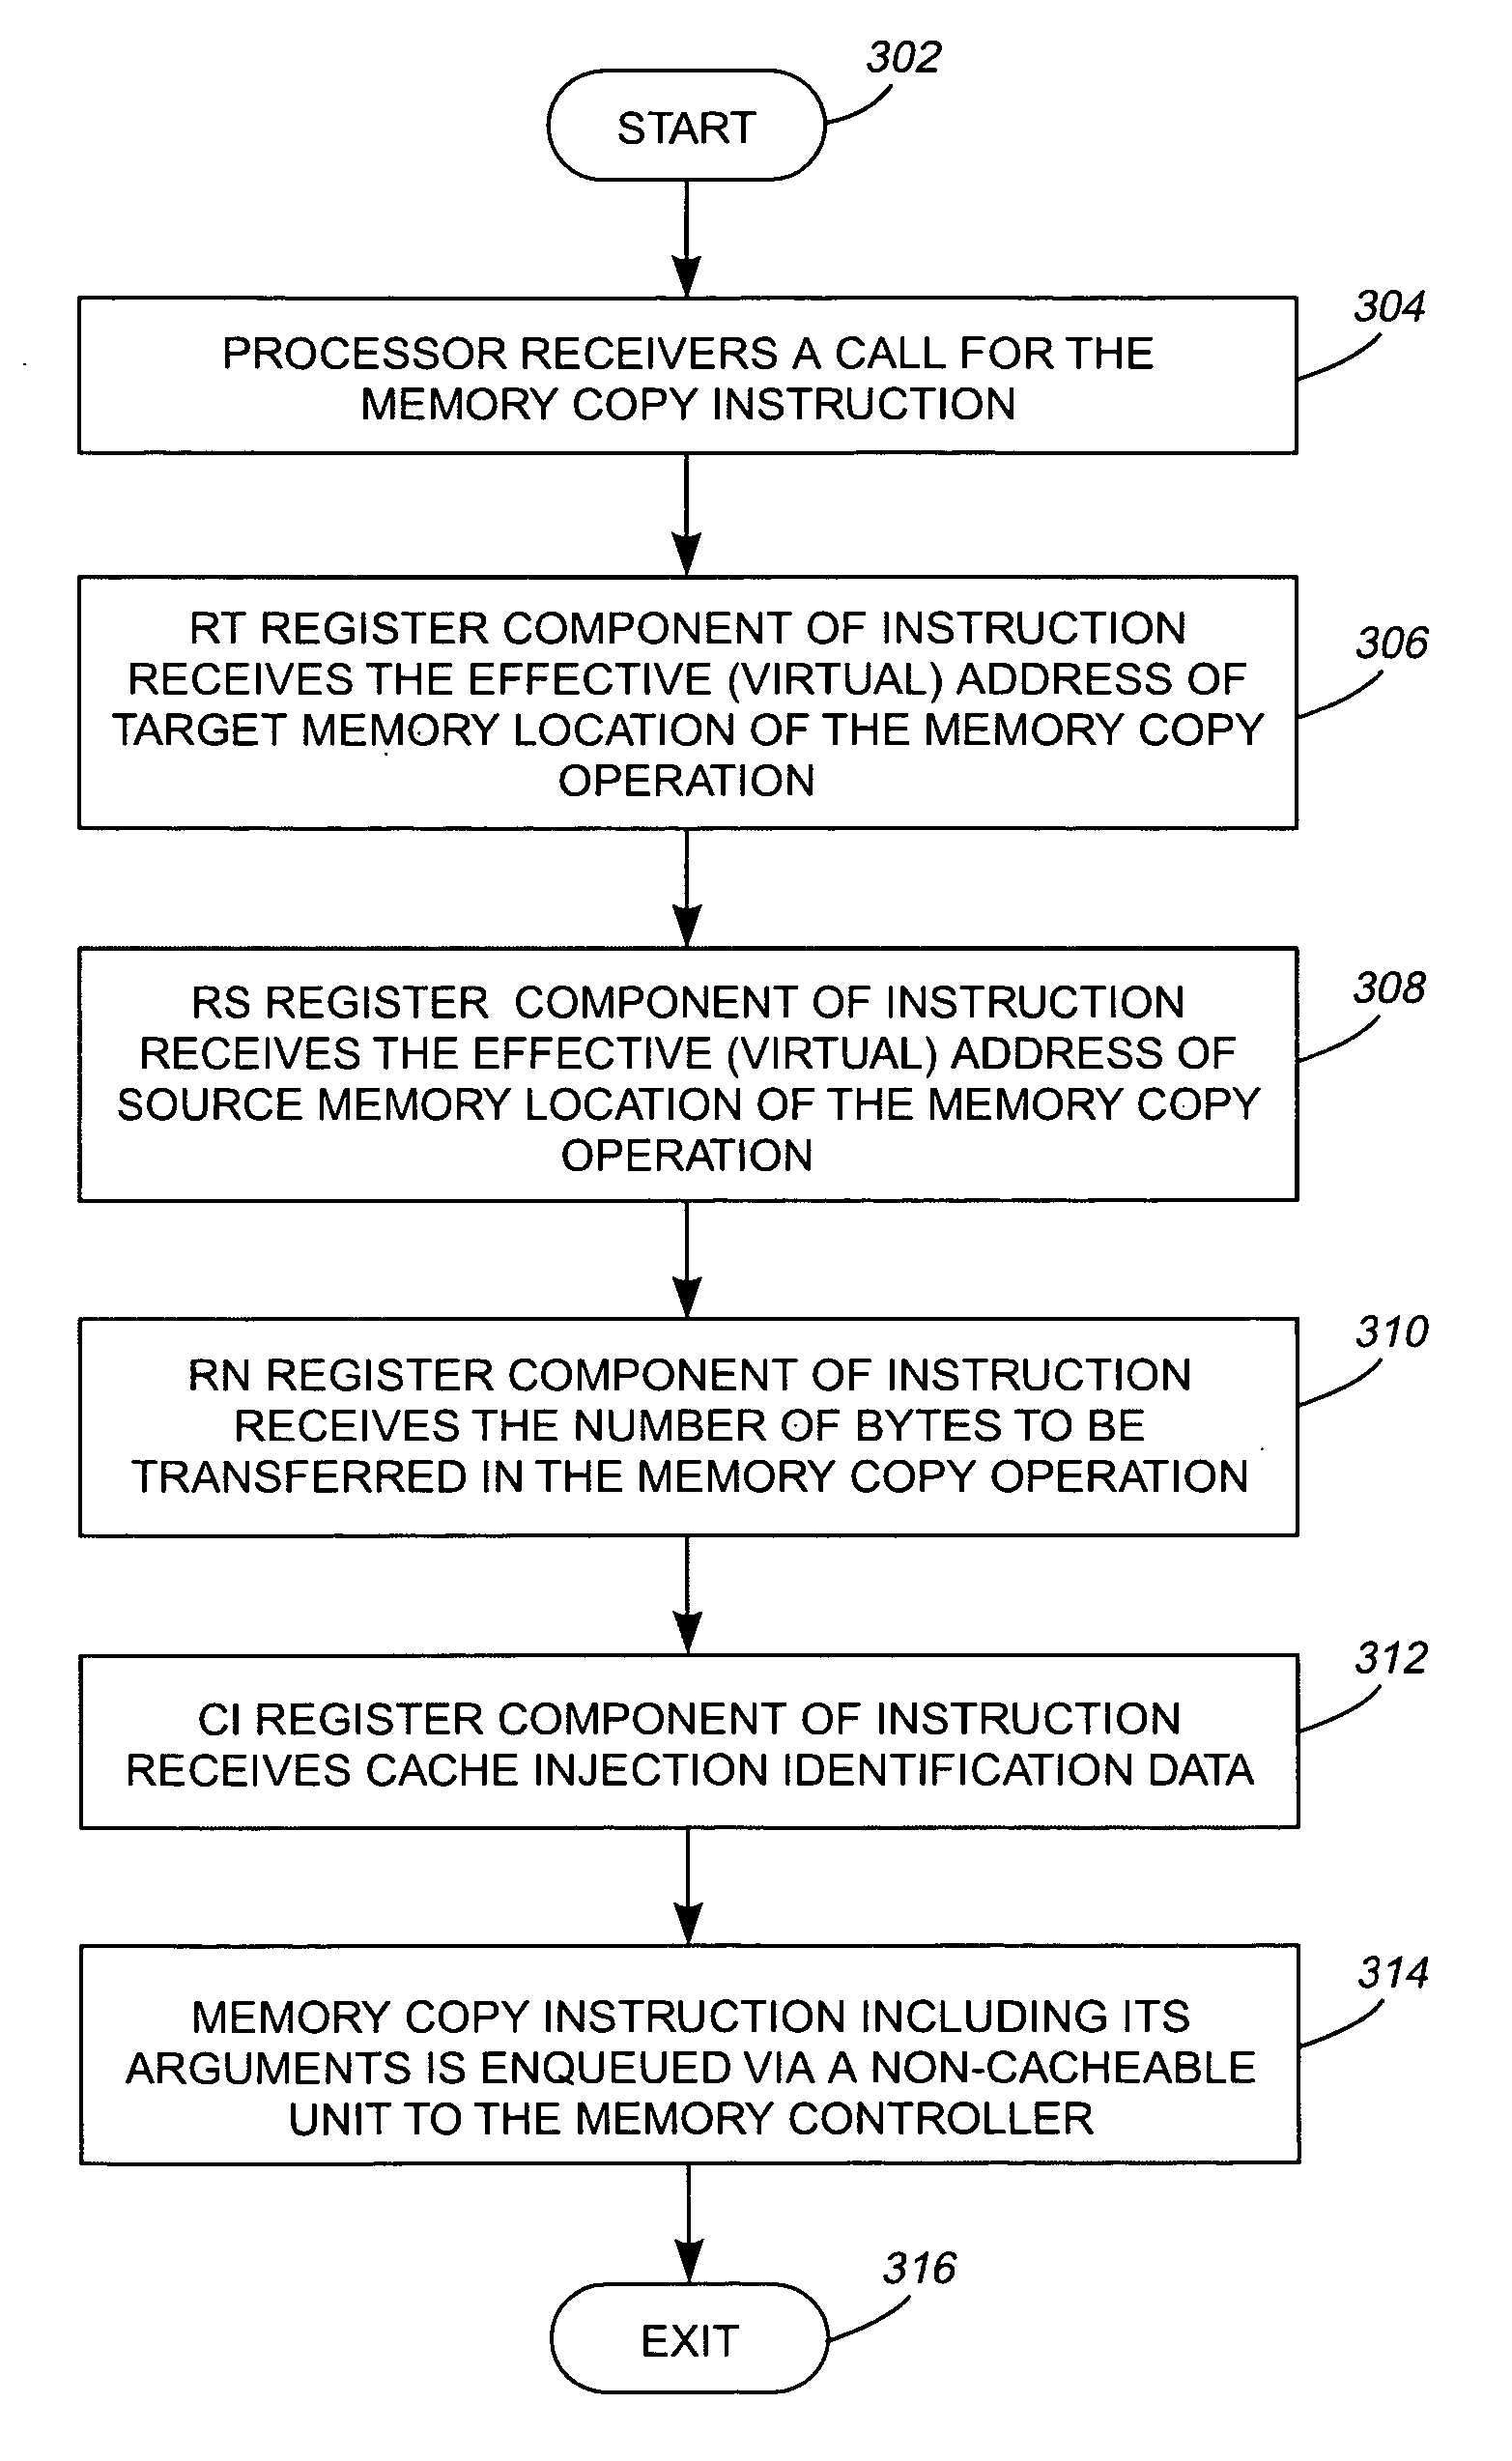 Efficient and flexible memory copy operation